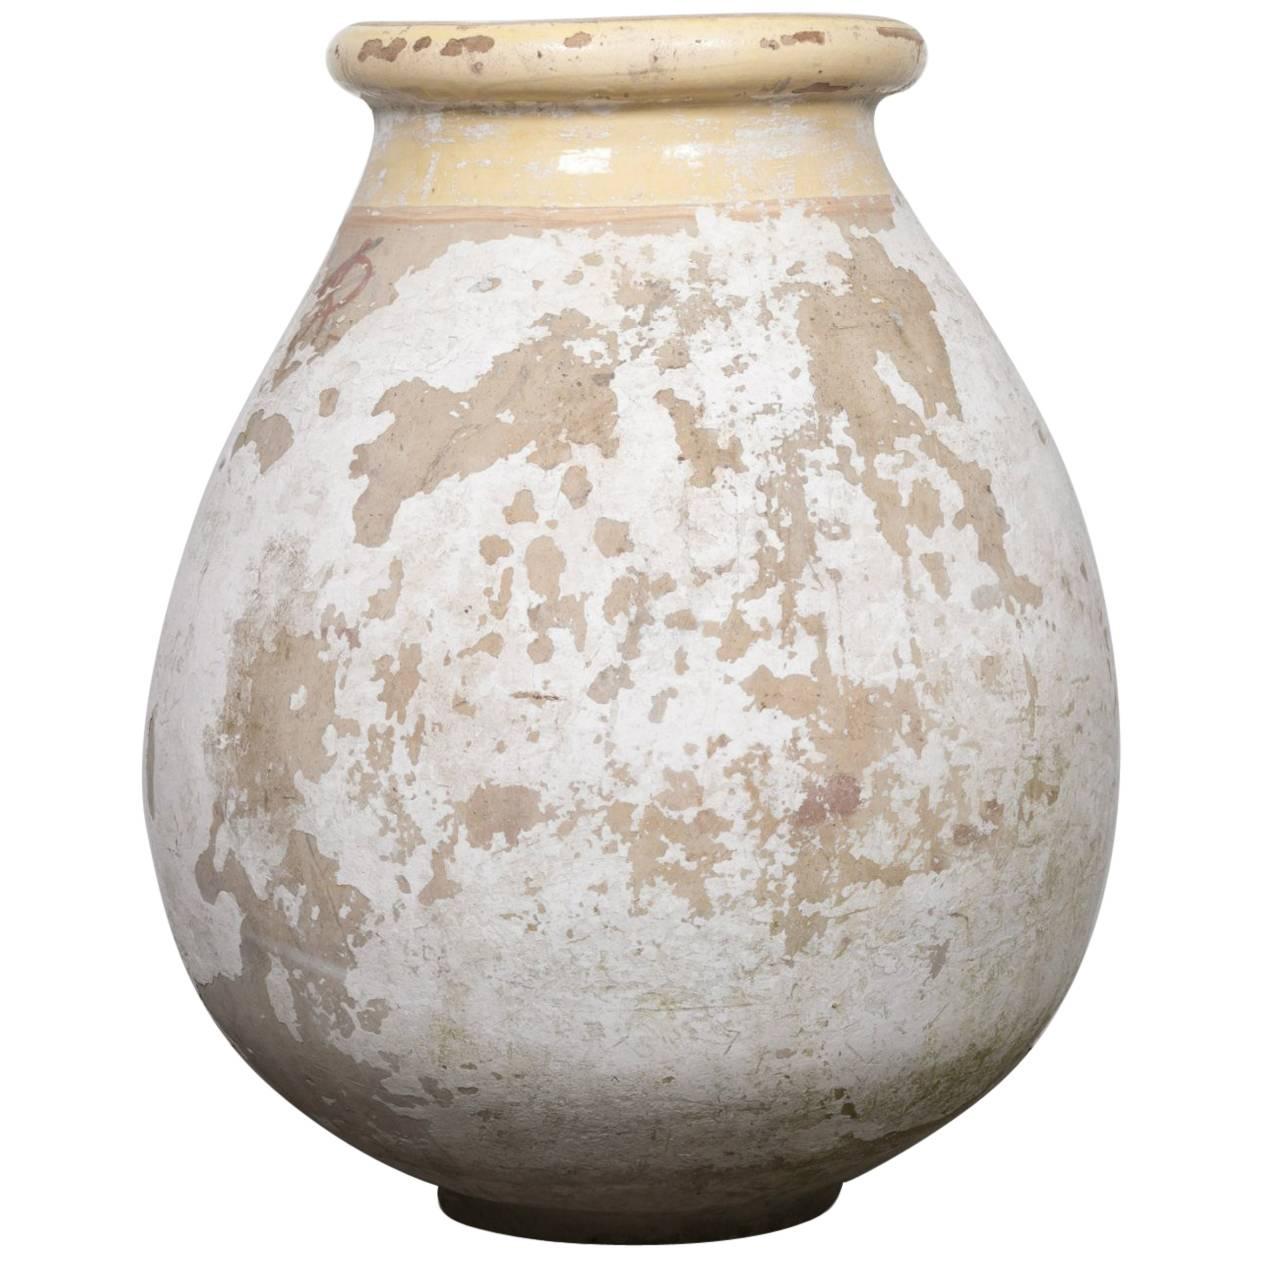 Large 19th Century French Terracotta Biot Pot or Jar